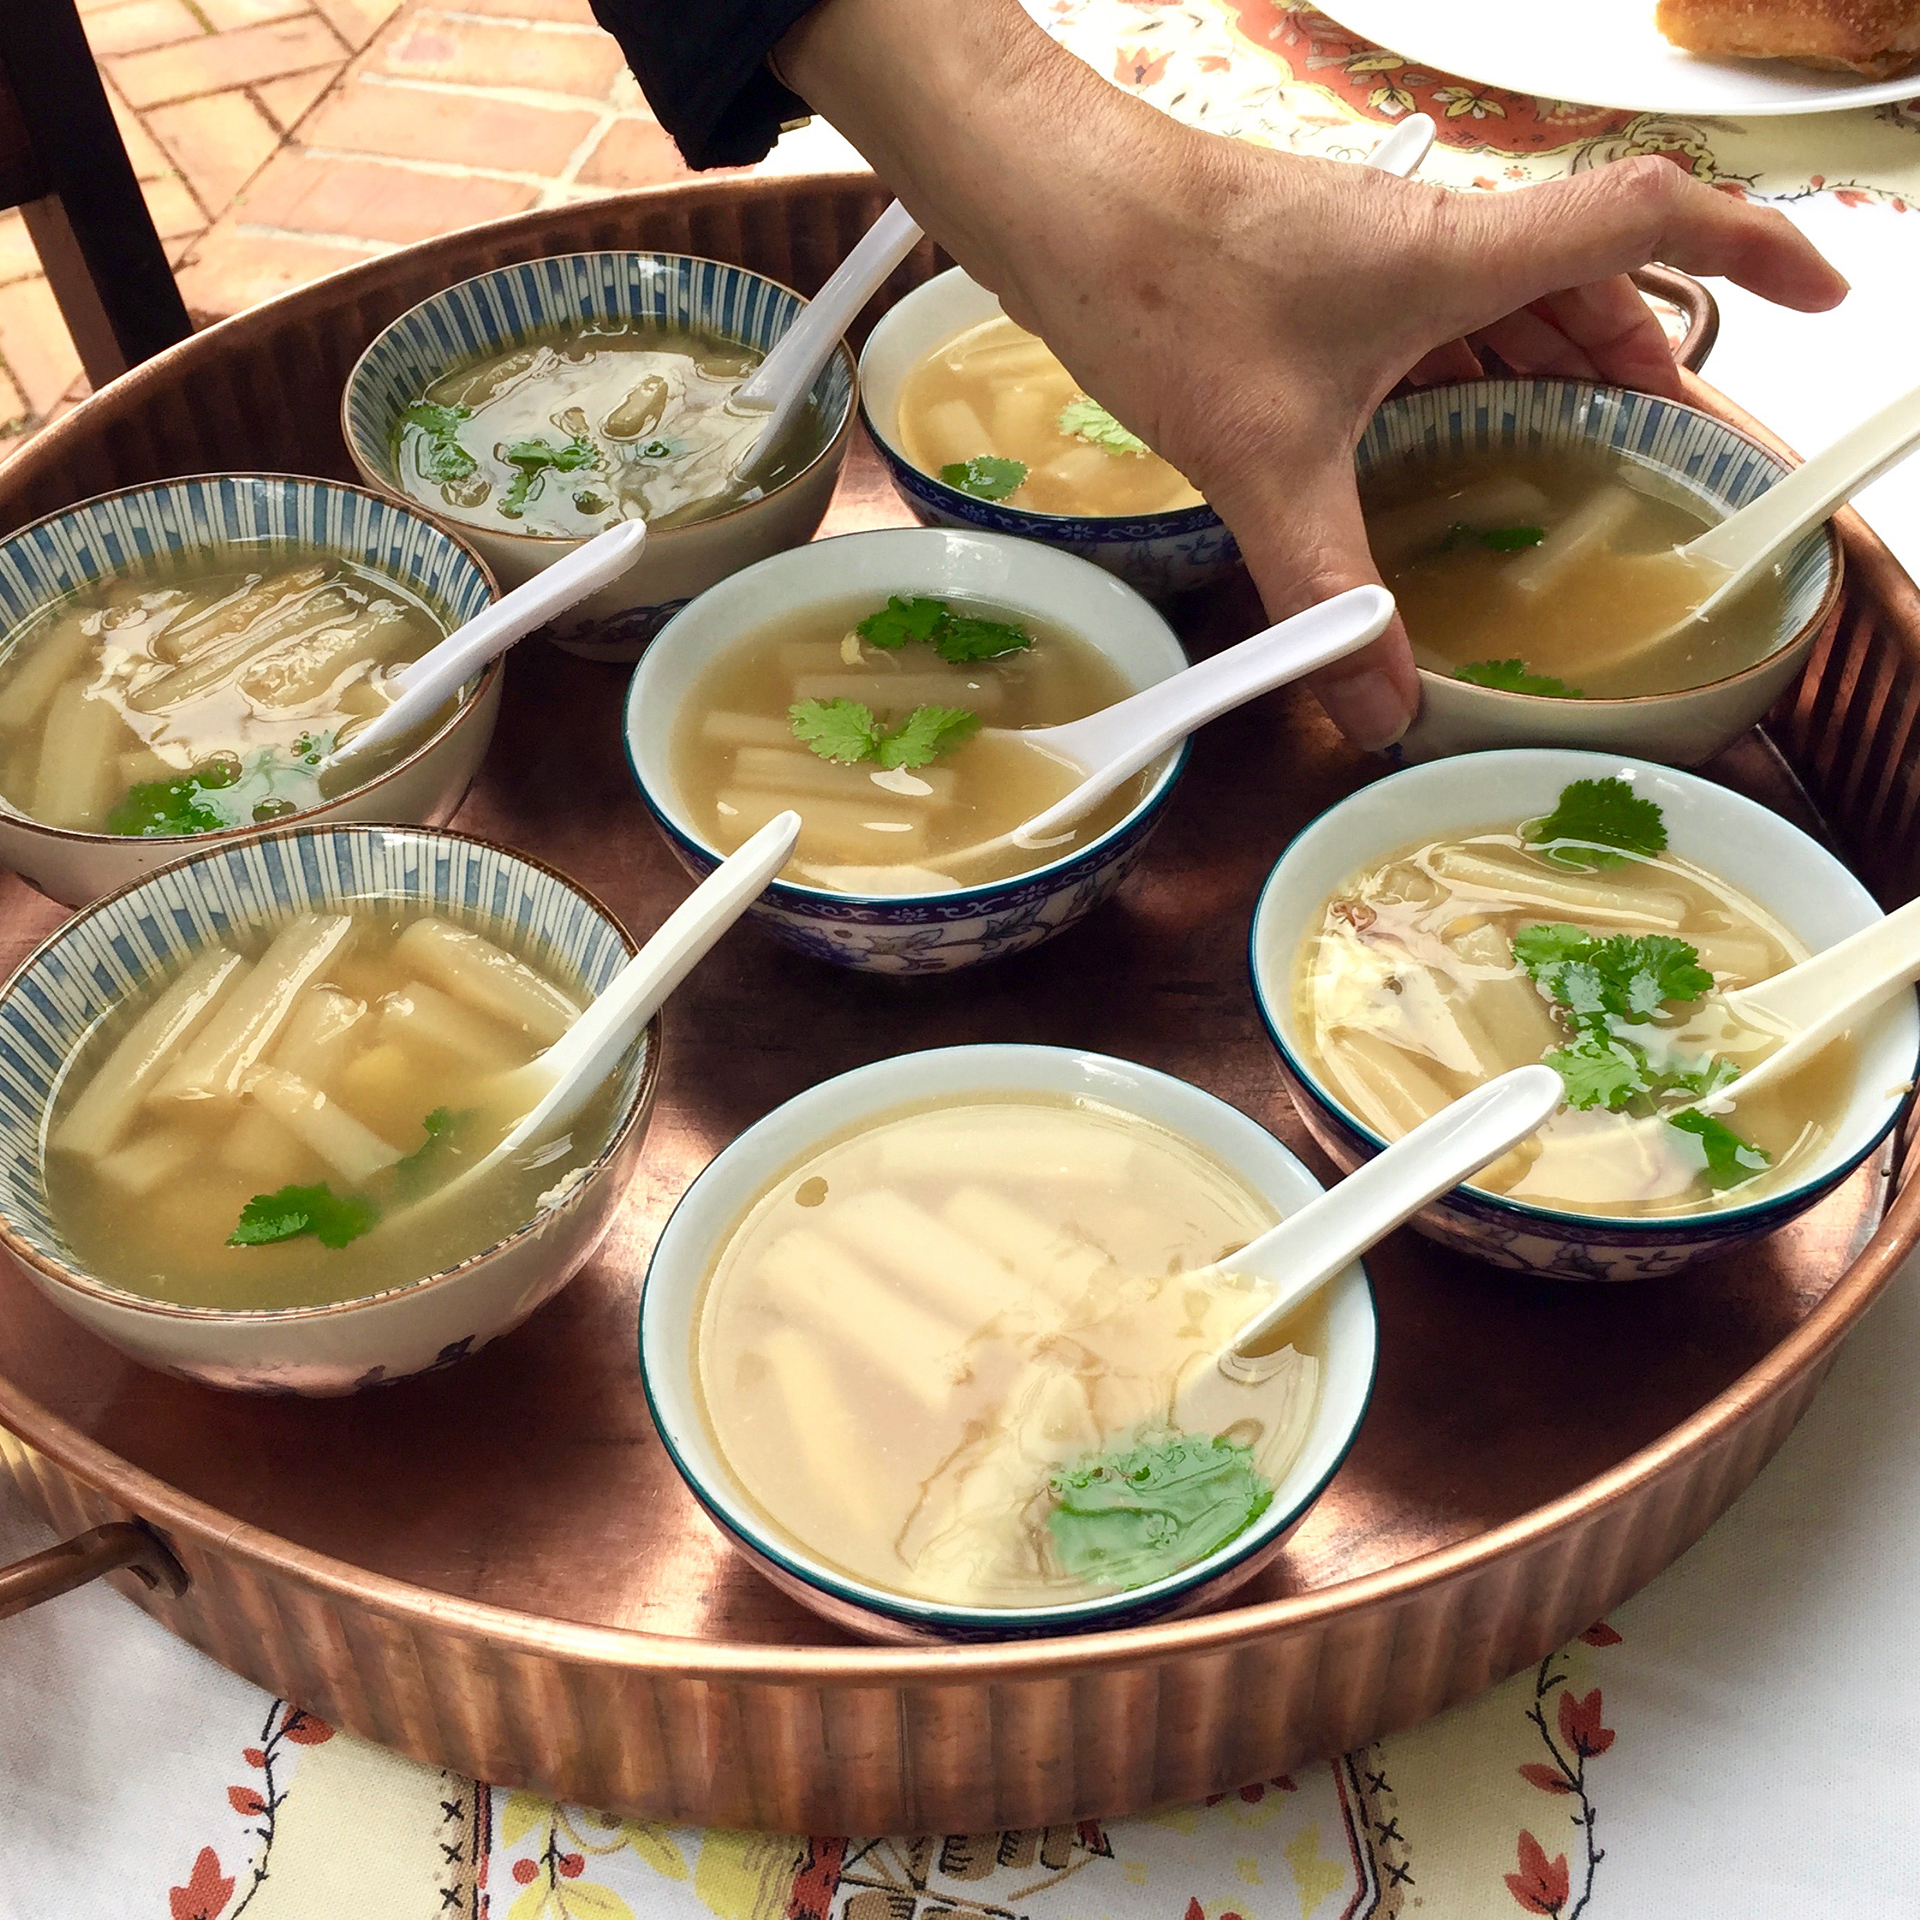 Crab and asparagus soup, a traditional dish for Vietnamese weddings.